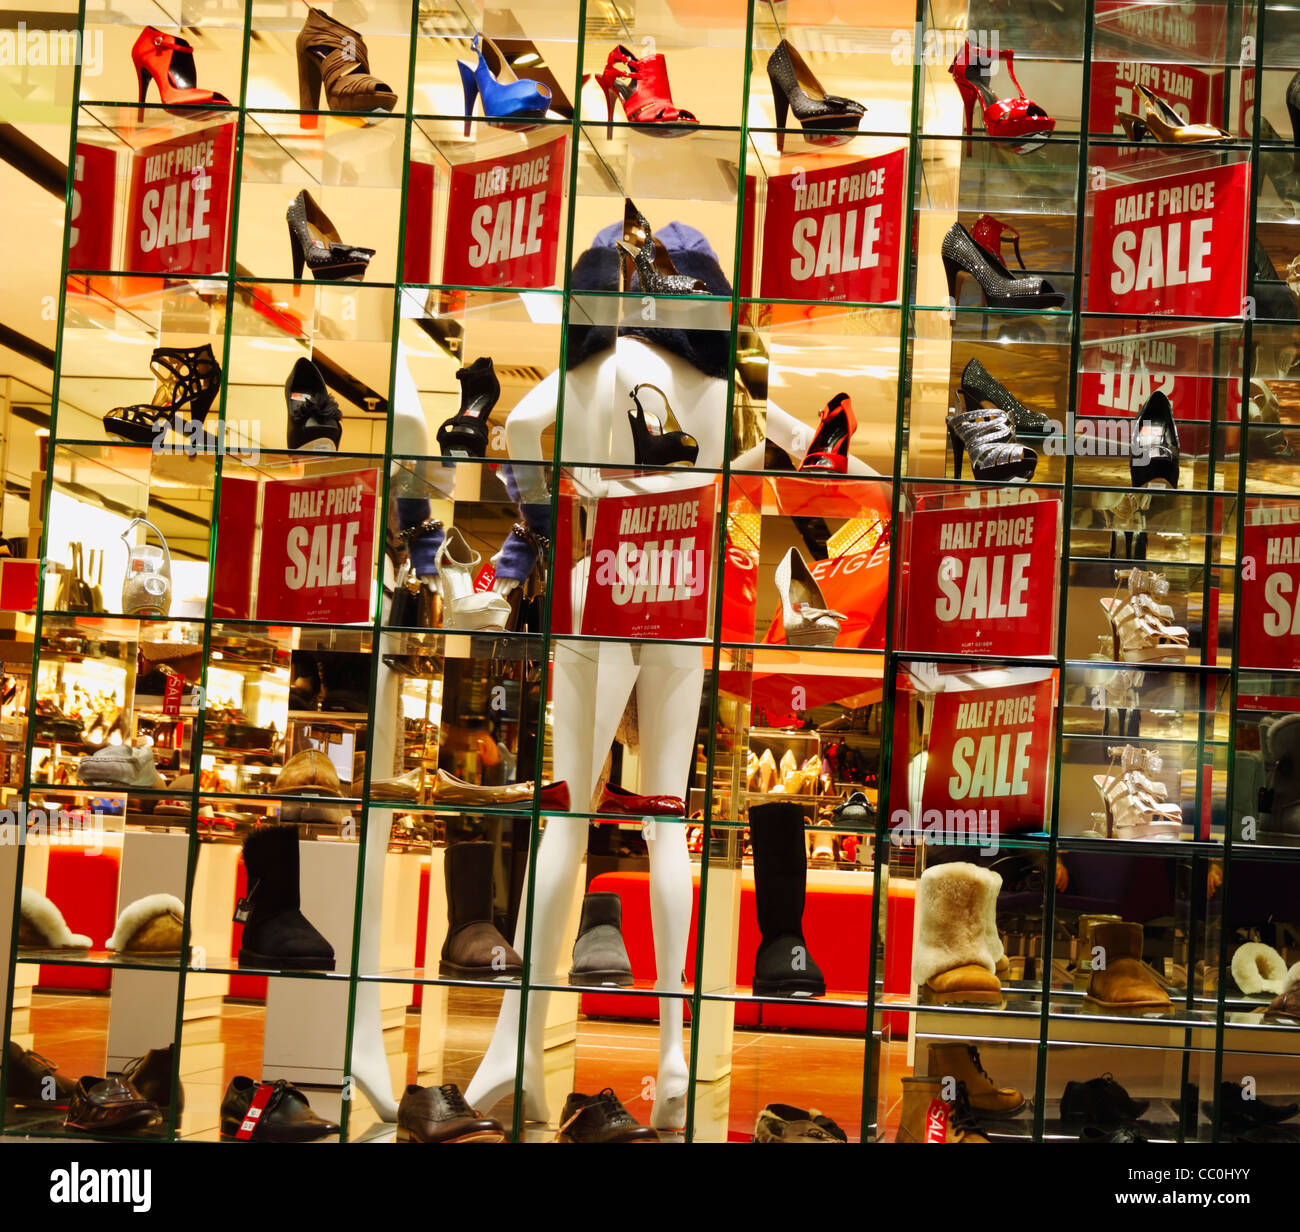 Half price sale sign in shoe shop window in Manchester airport Stock Photo